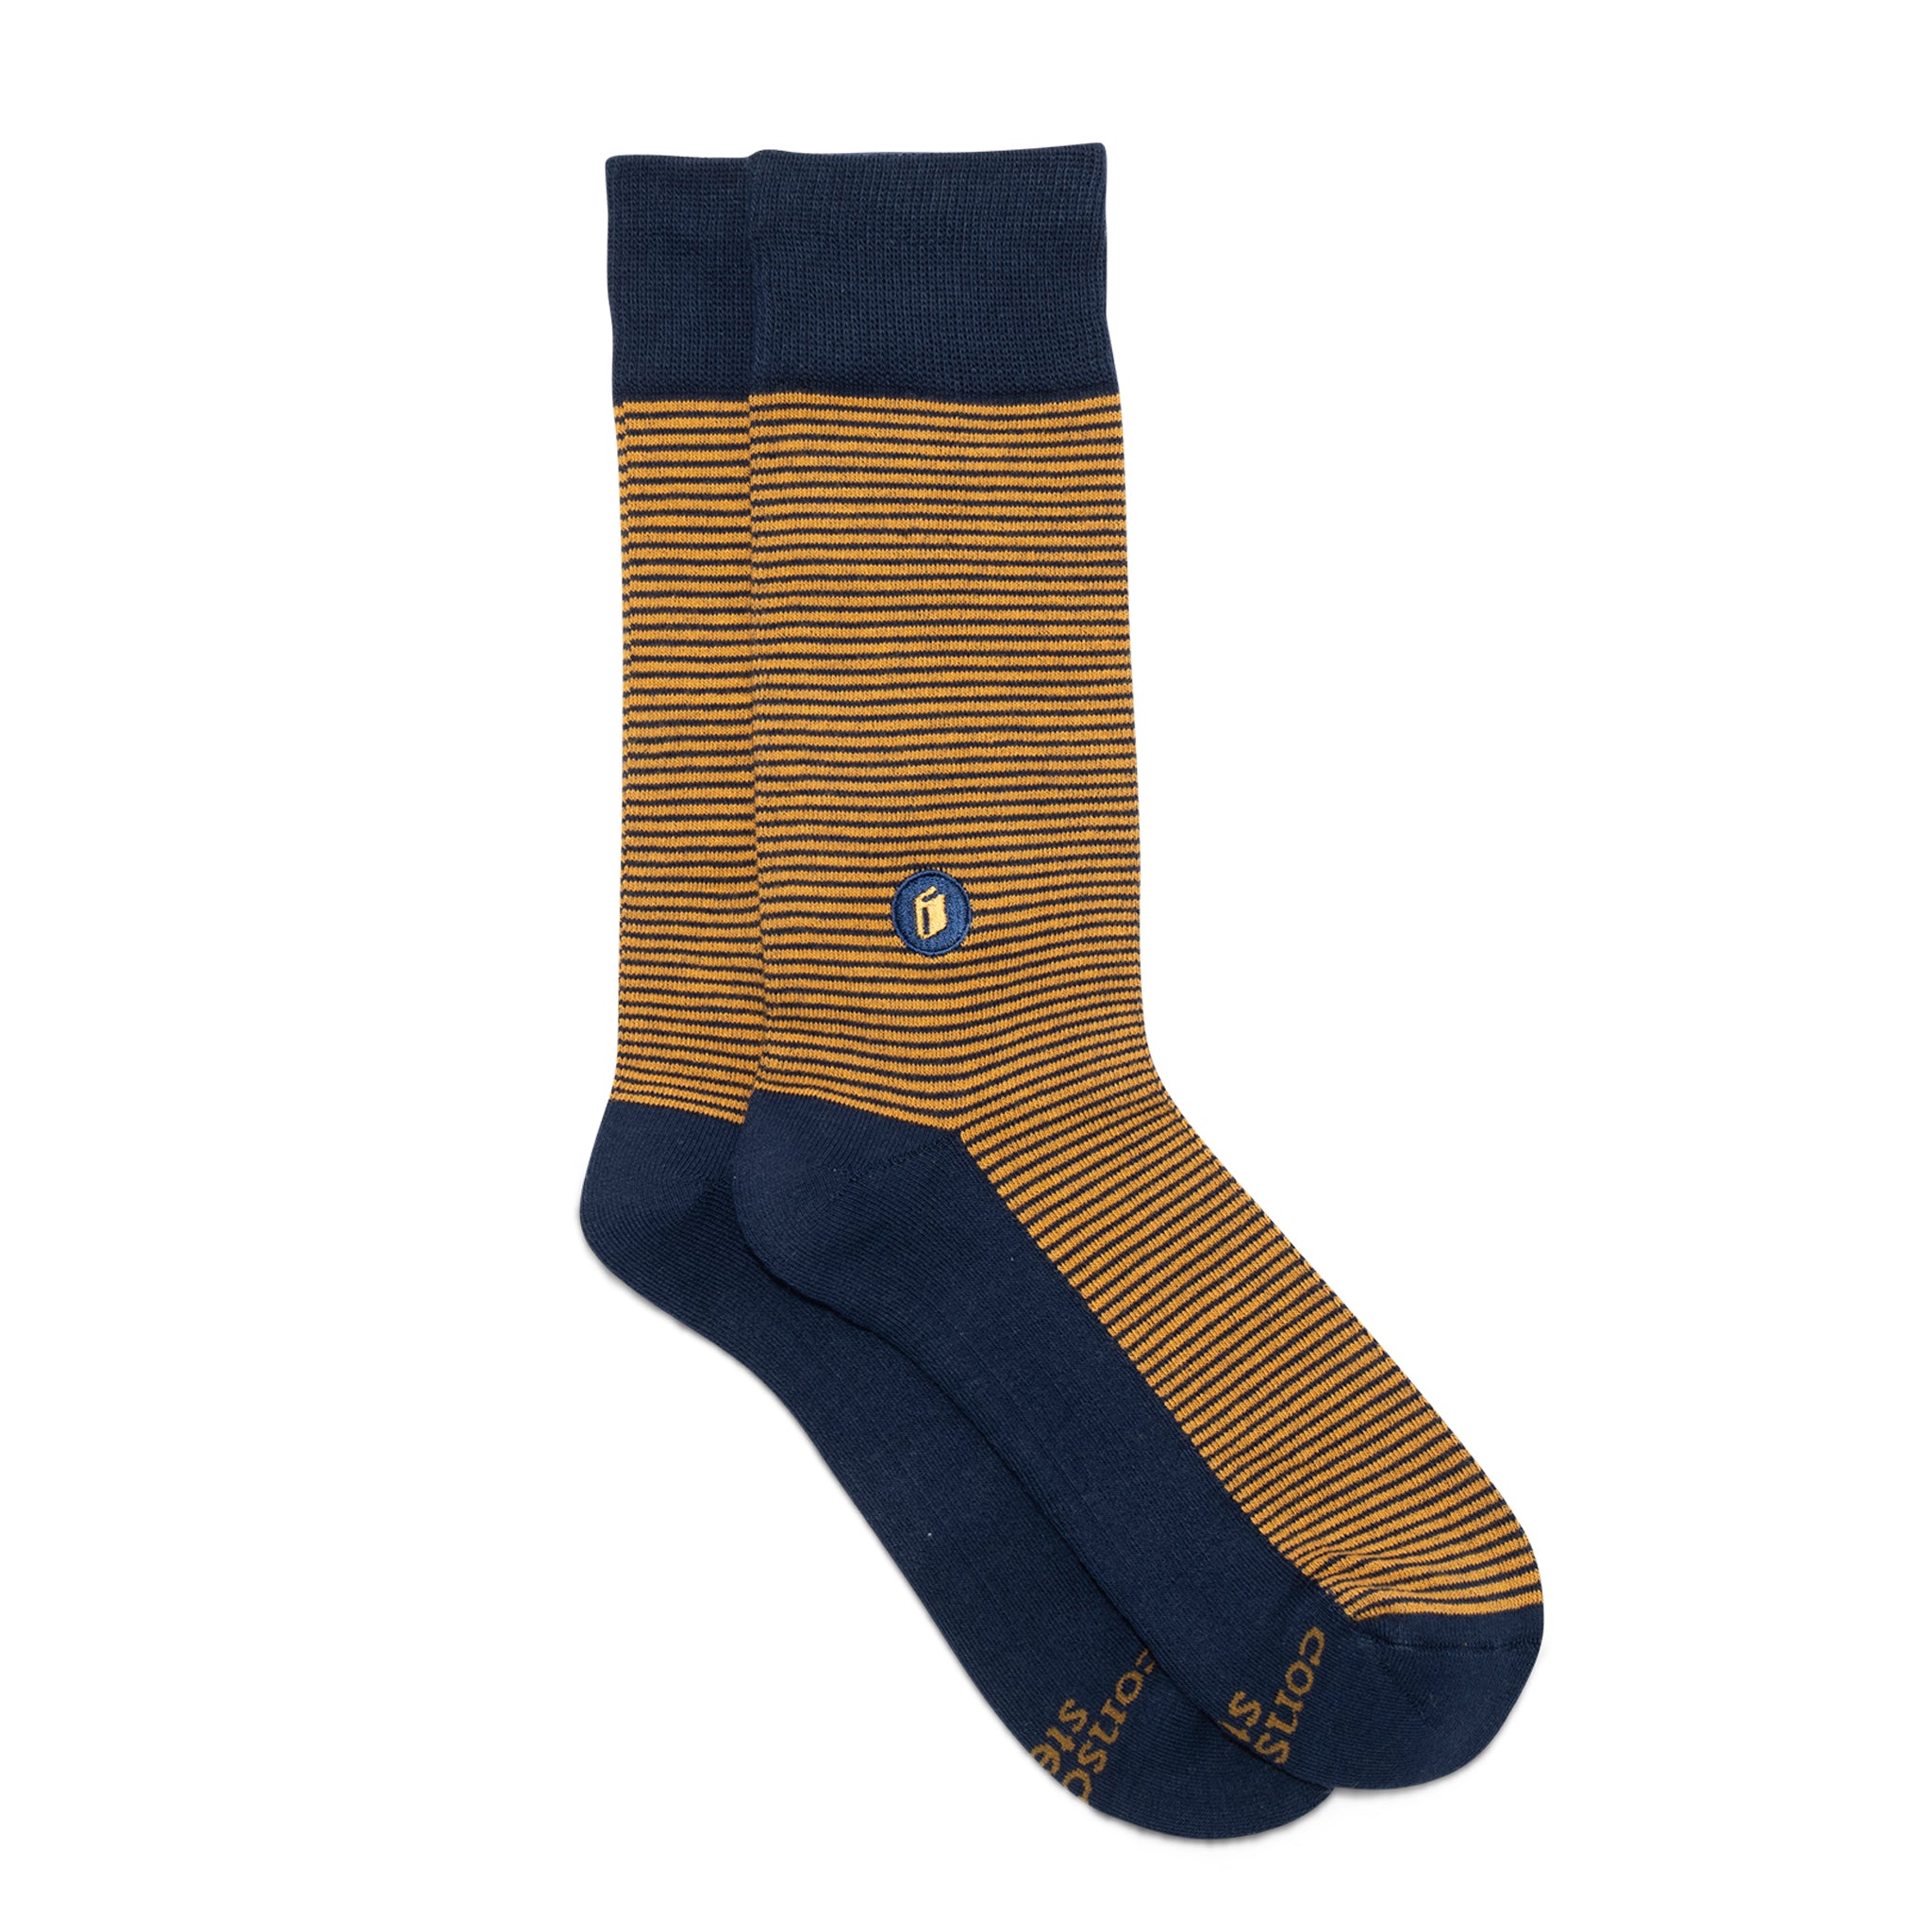 Conscious Step | Socks that Give Books | Support Room to Read